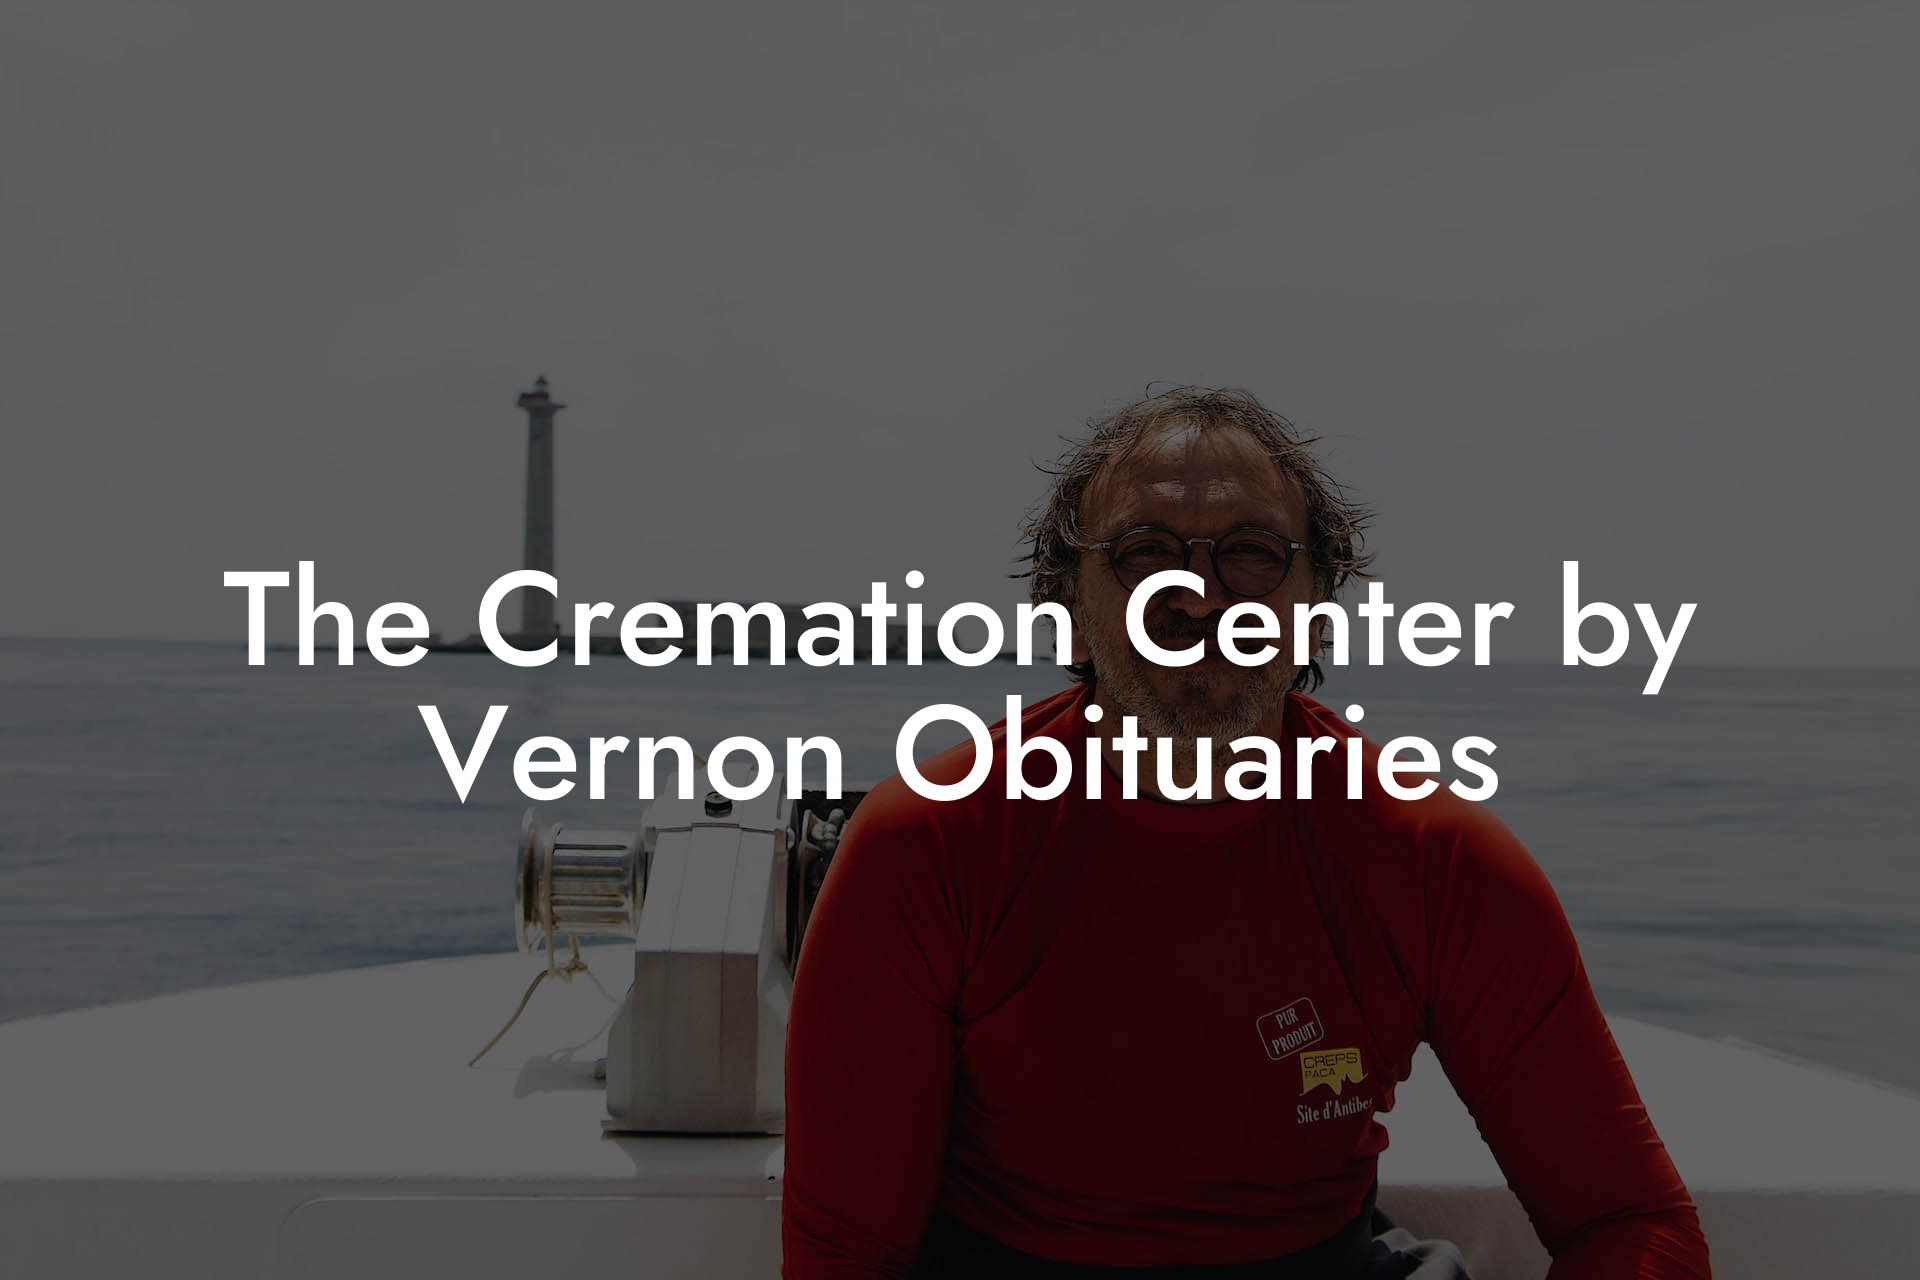 The Cremation Center by Vernon Obituaries